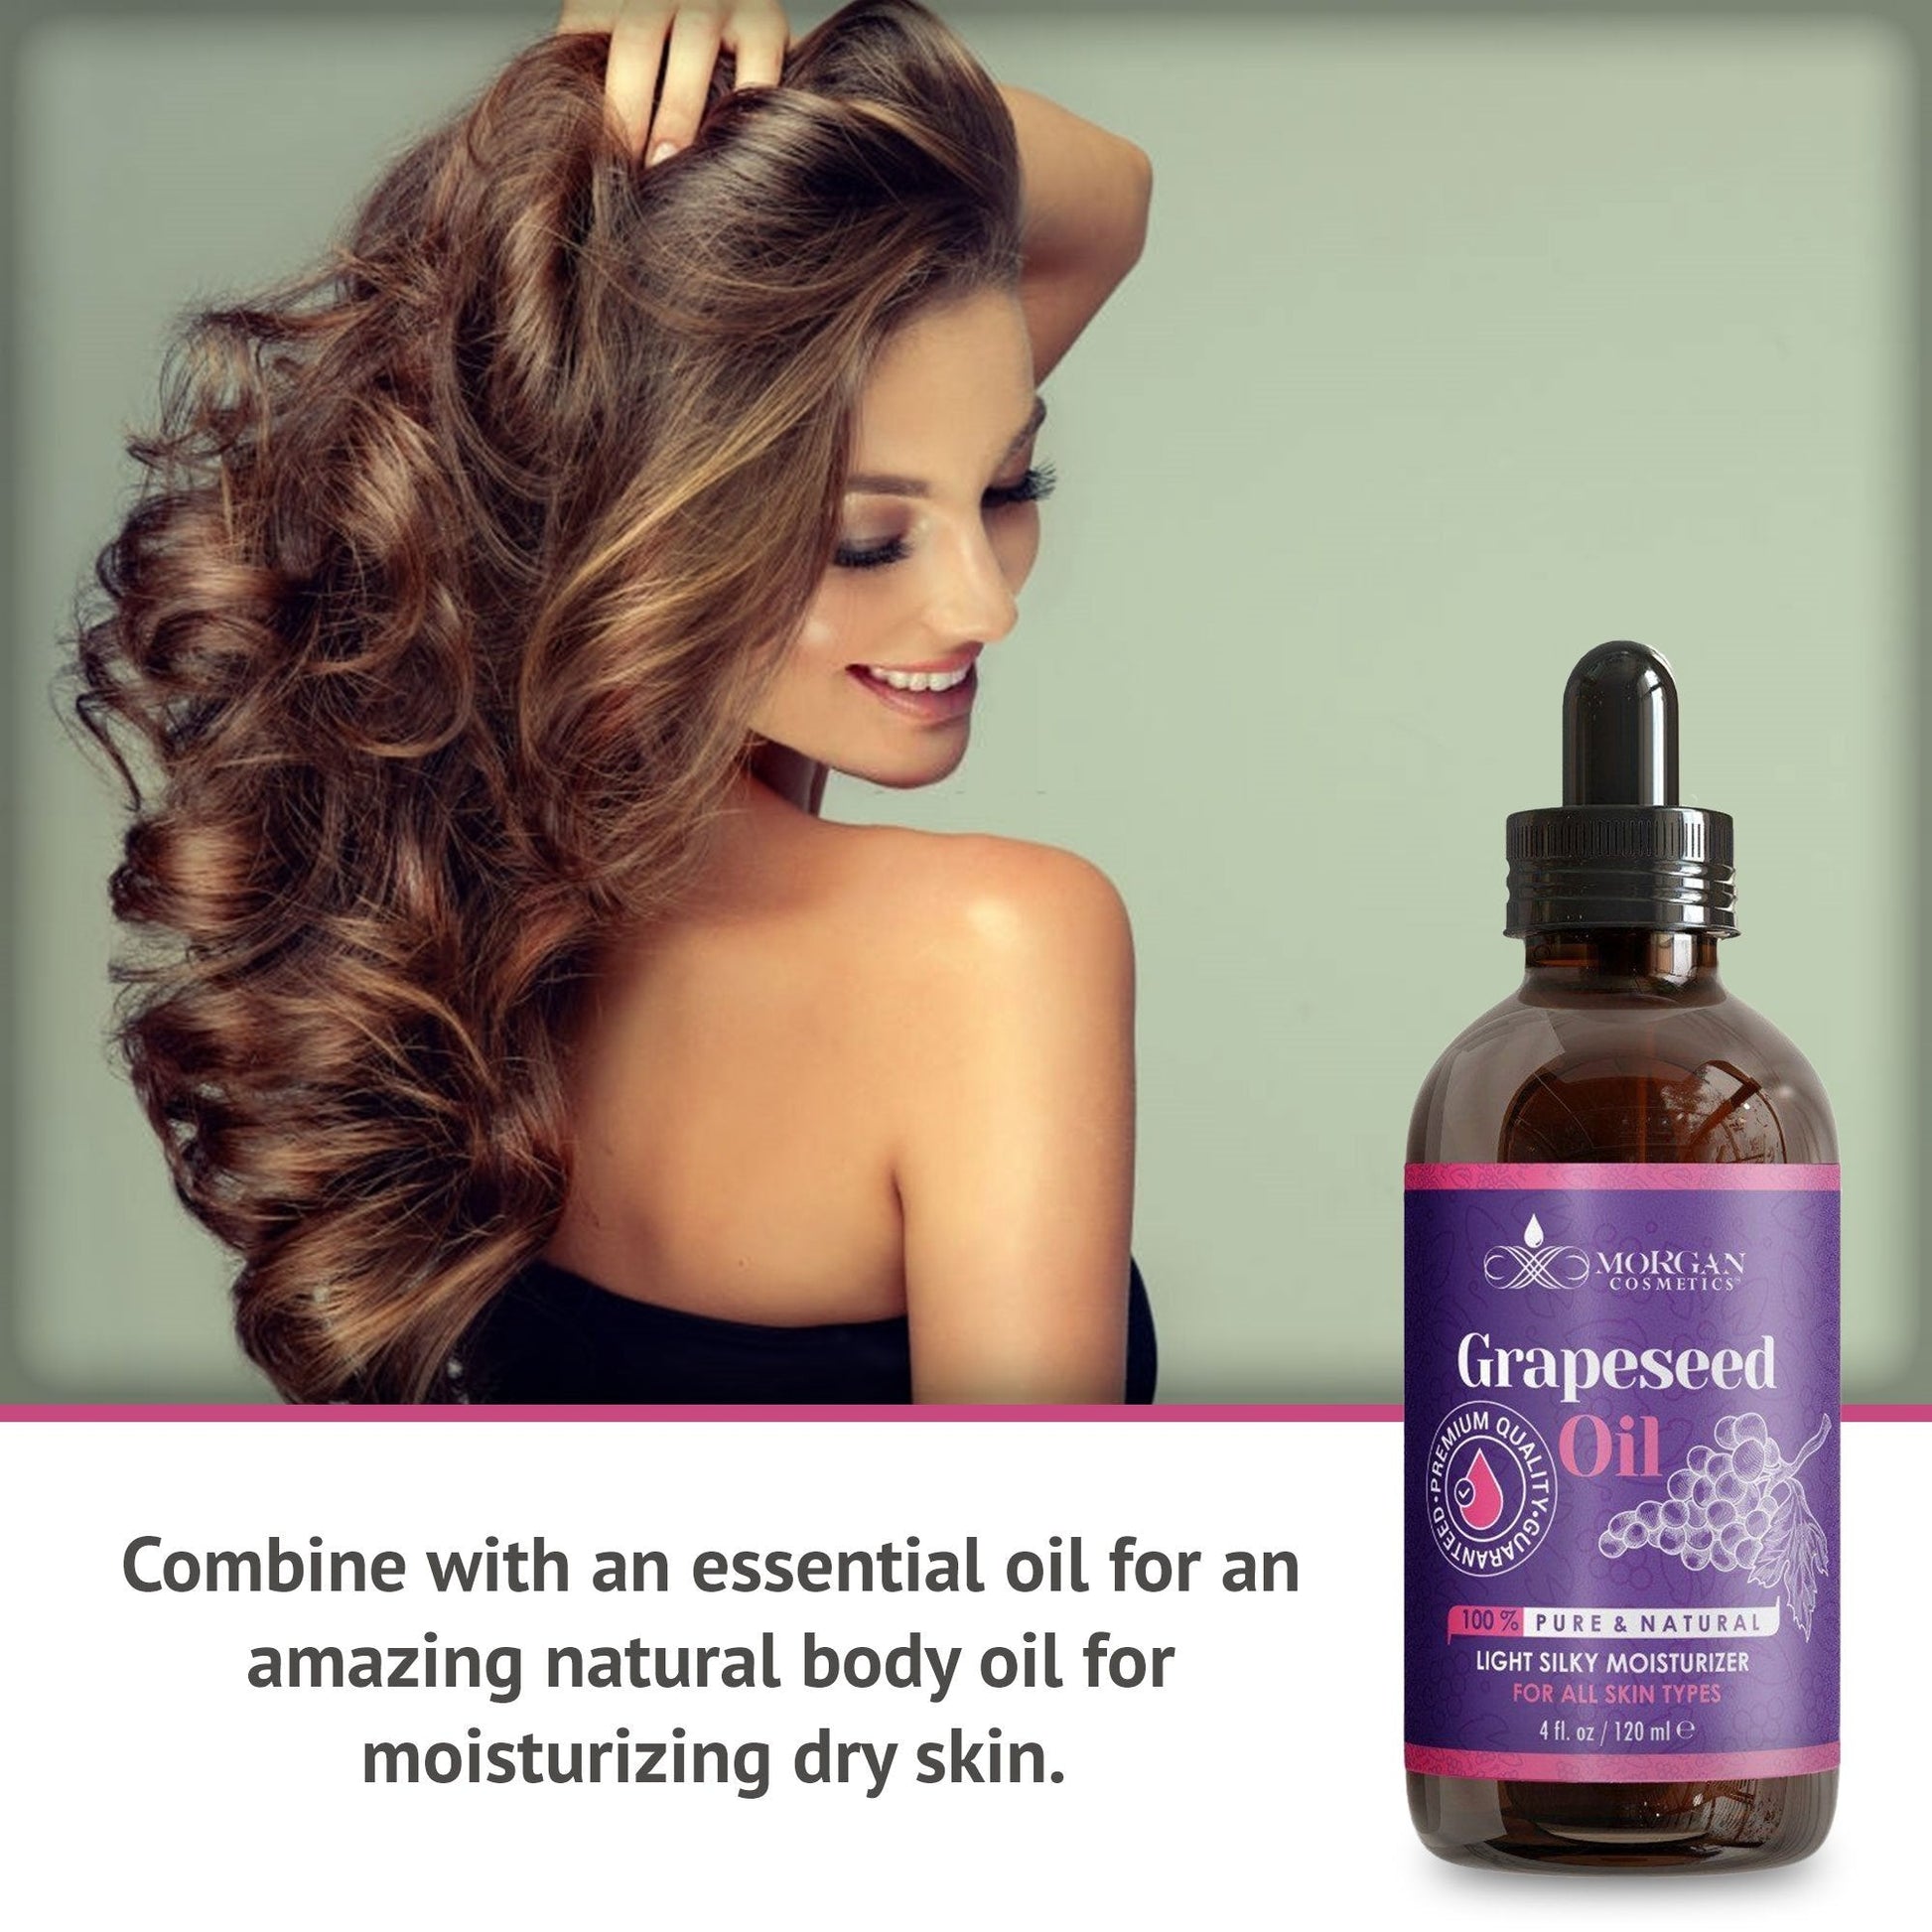 100% Pure Grapeseed Oil Antioxidant-rich Oil For all Skin types 4 fl oz 118 ml freeshipping - morgancosmeticsofficial